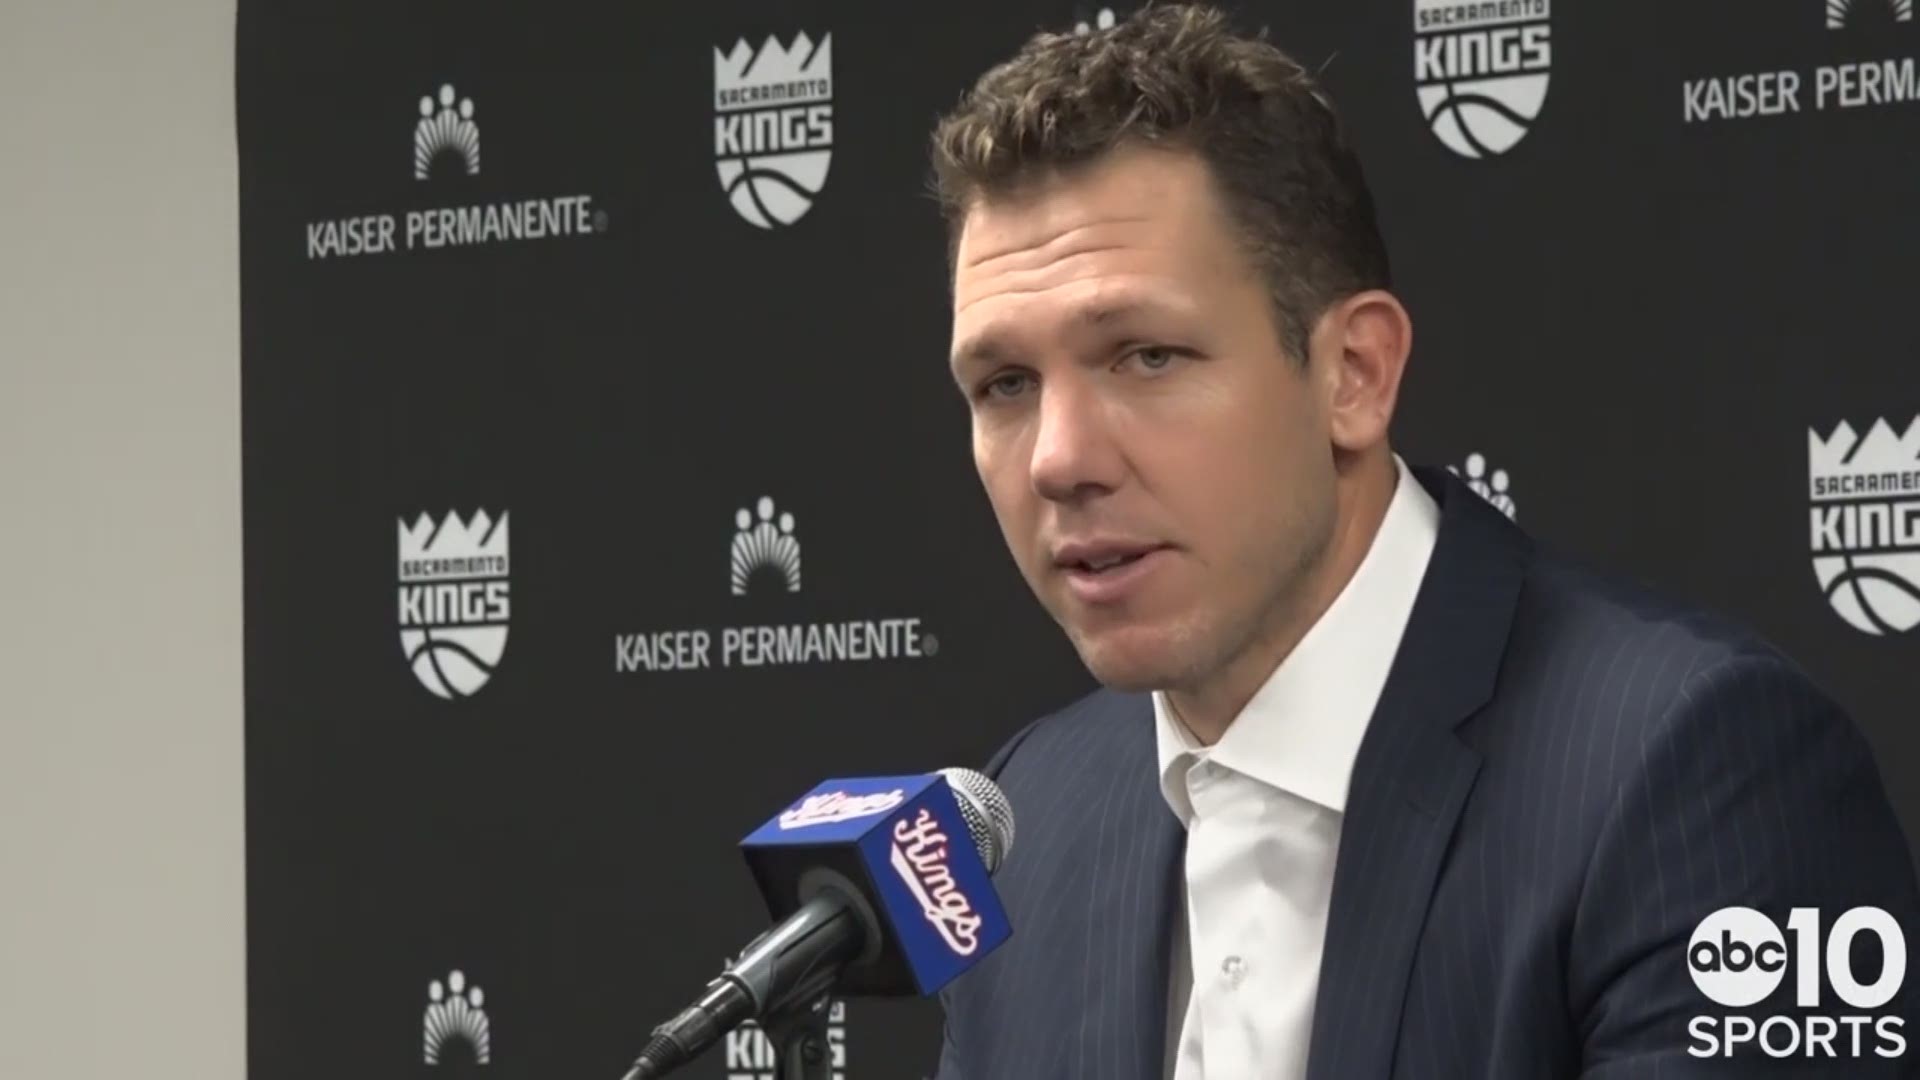 Kings coach Luke Walton talks about Sacramento's defensive effort and Buddy Hield’s 35 point performance to edge the Boston Celtics 100-99 on Sunday afternoon.